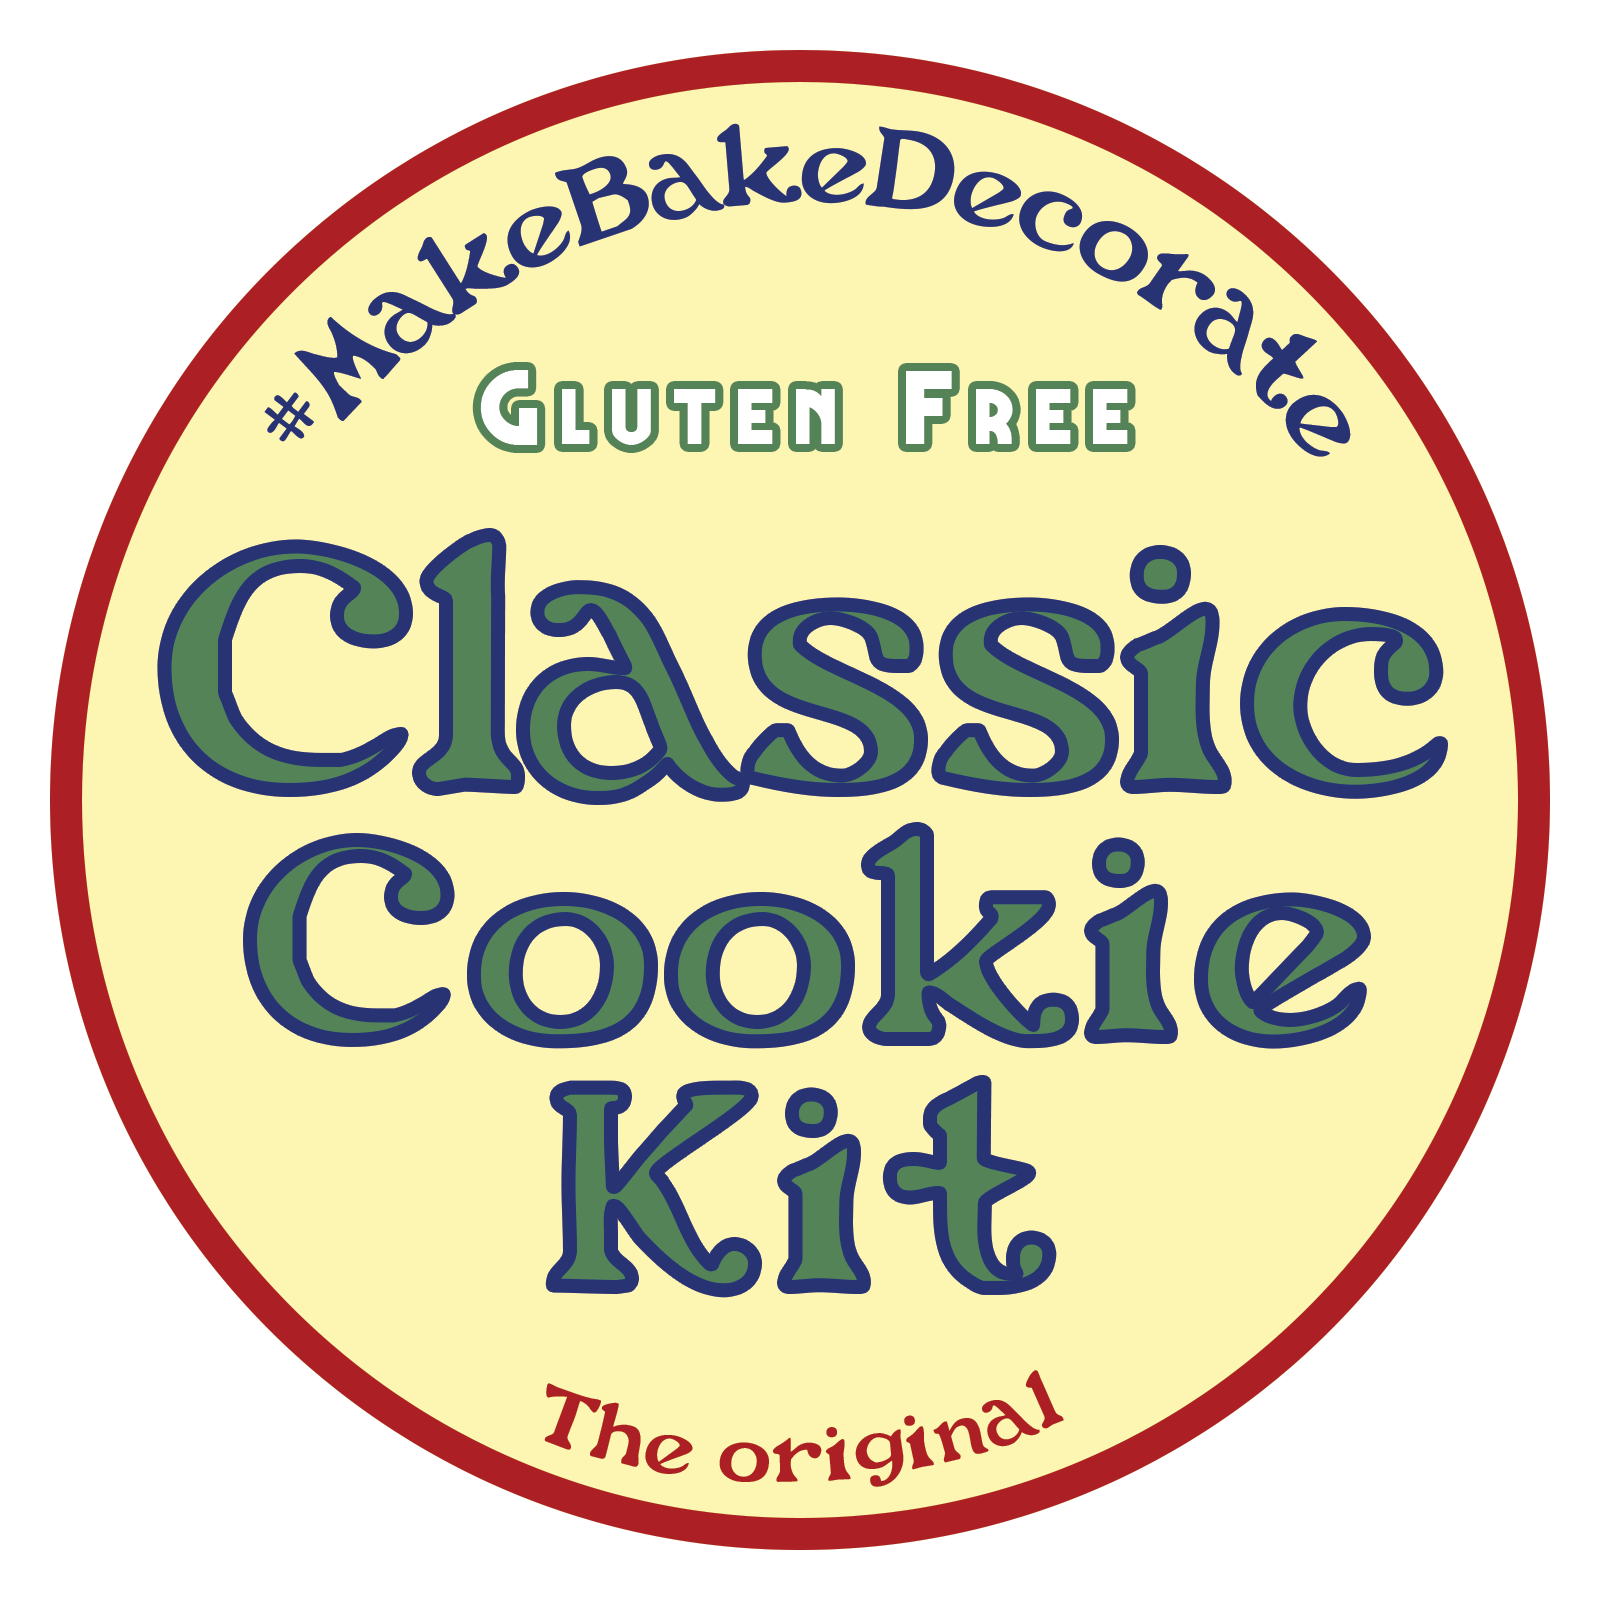 Classic Gingerbread Cookie Kit | Ginger's Breadboys | Gluten Free Gingerbread Man Baking mix |  DIY Gingerbread Boy Baking and Decorating Kits